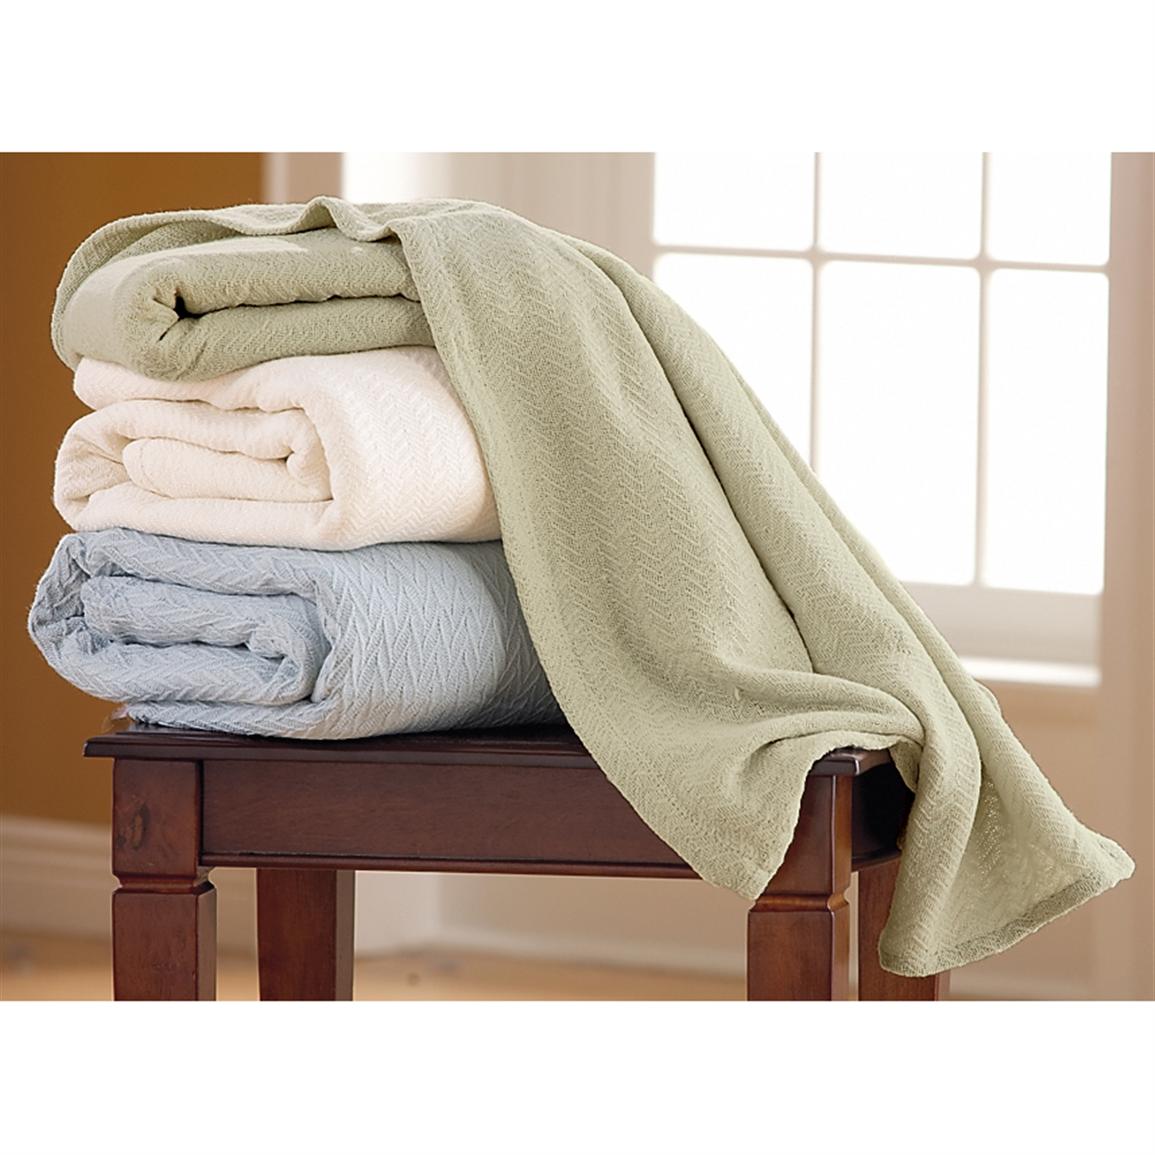 Cotton Thermal Blanket 176482 Blankets Throws At Sportsman39s Guide